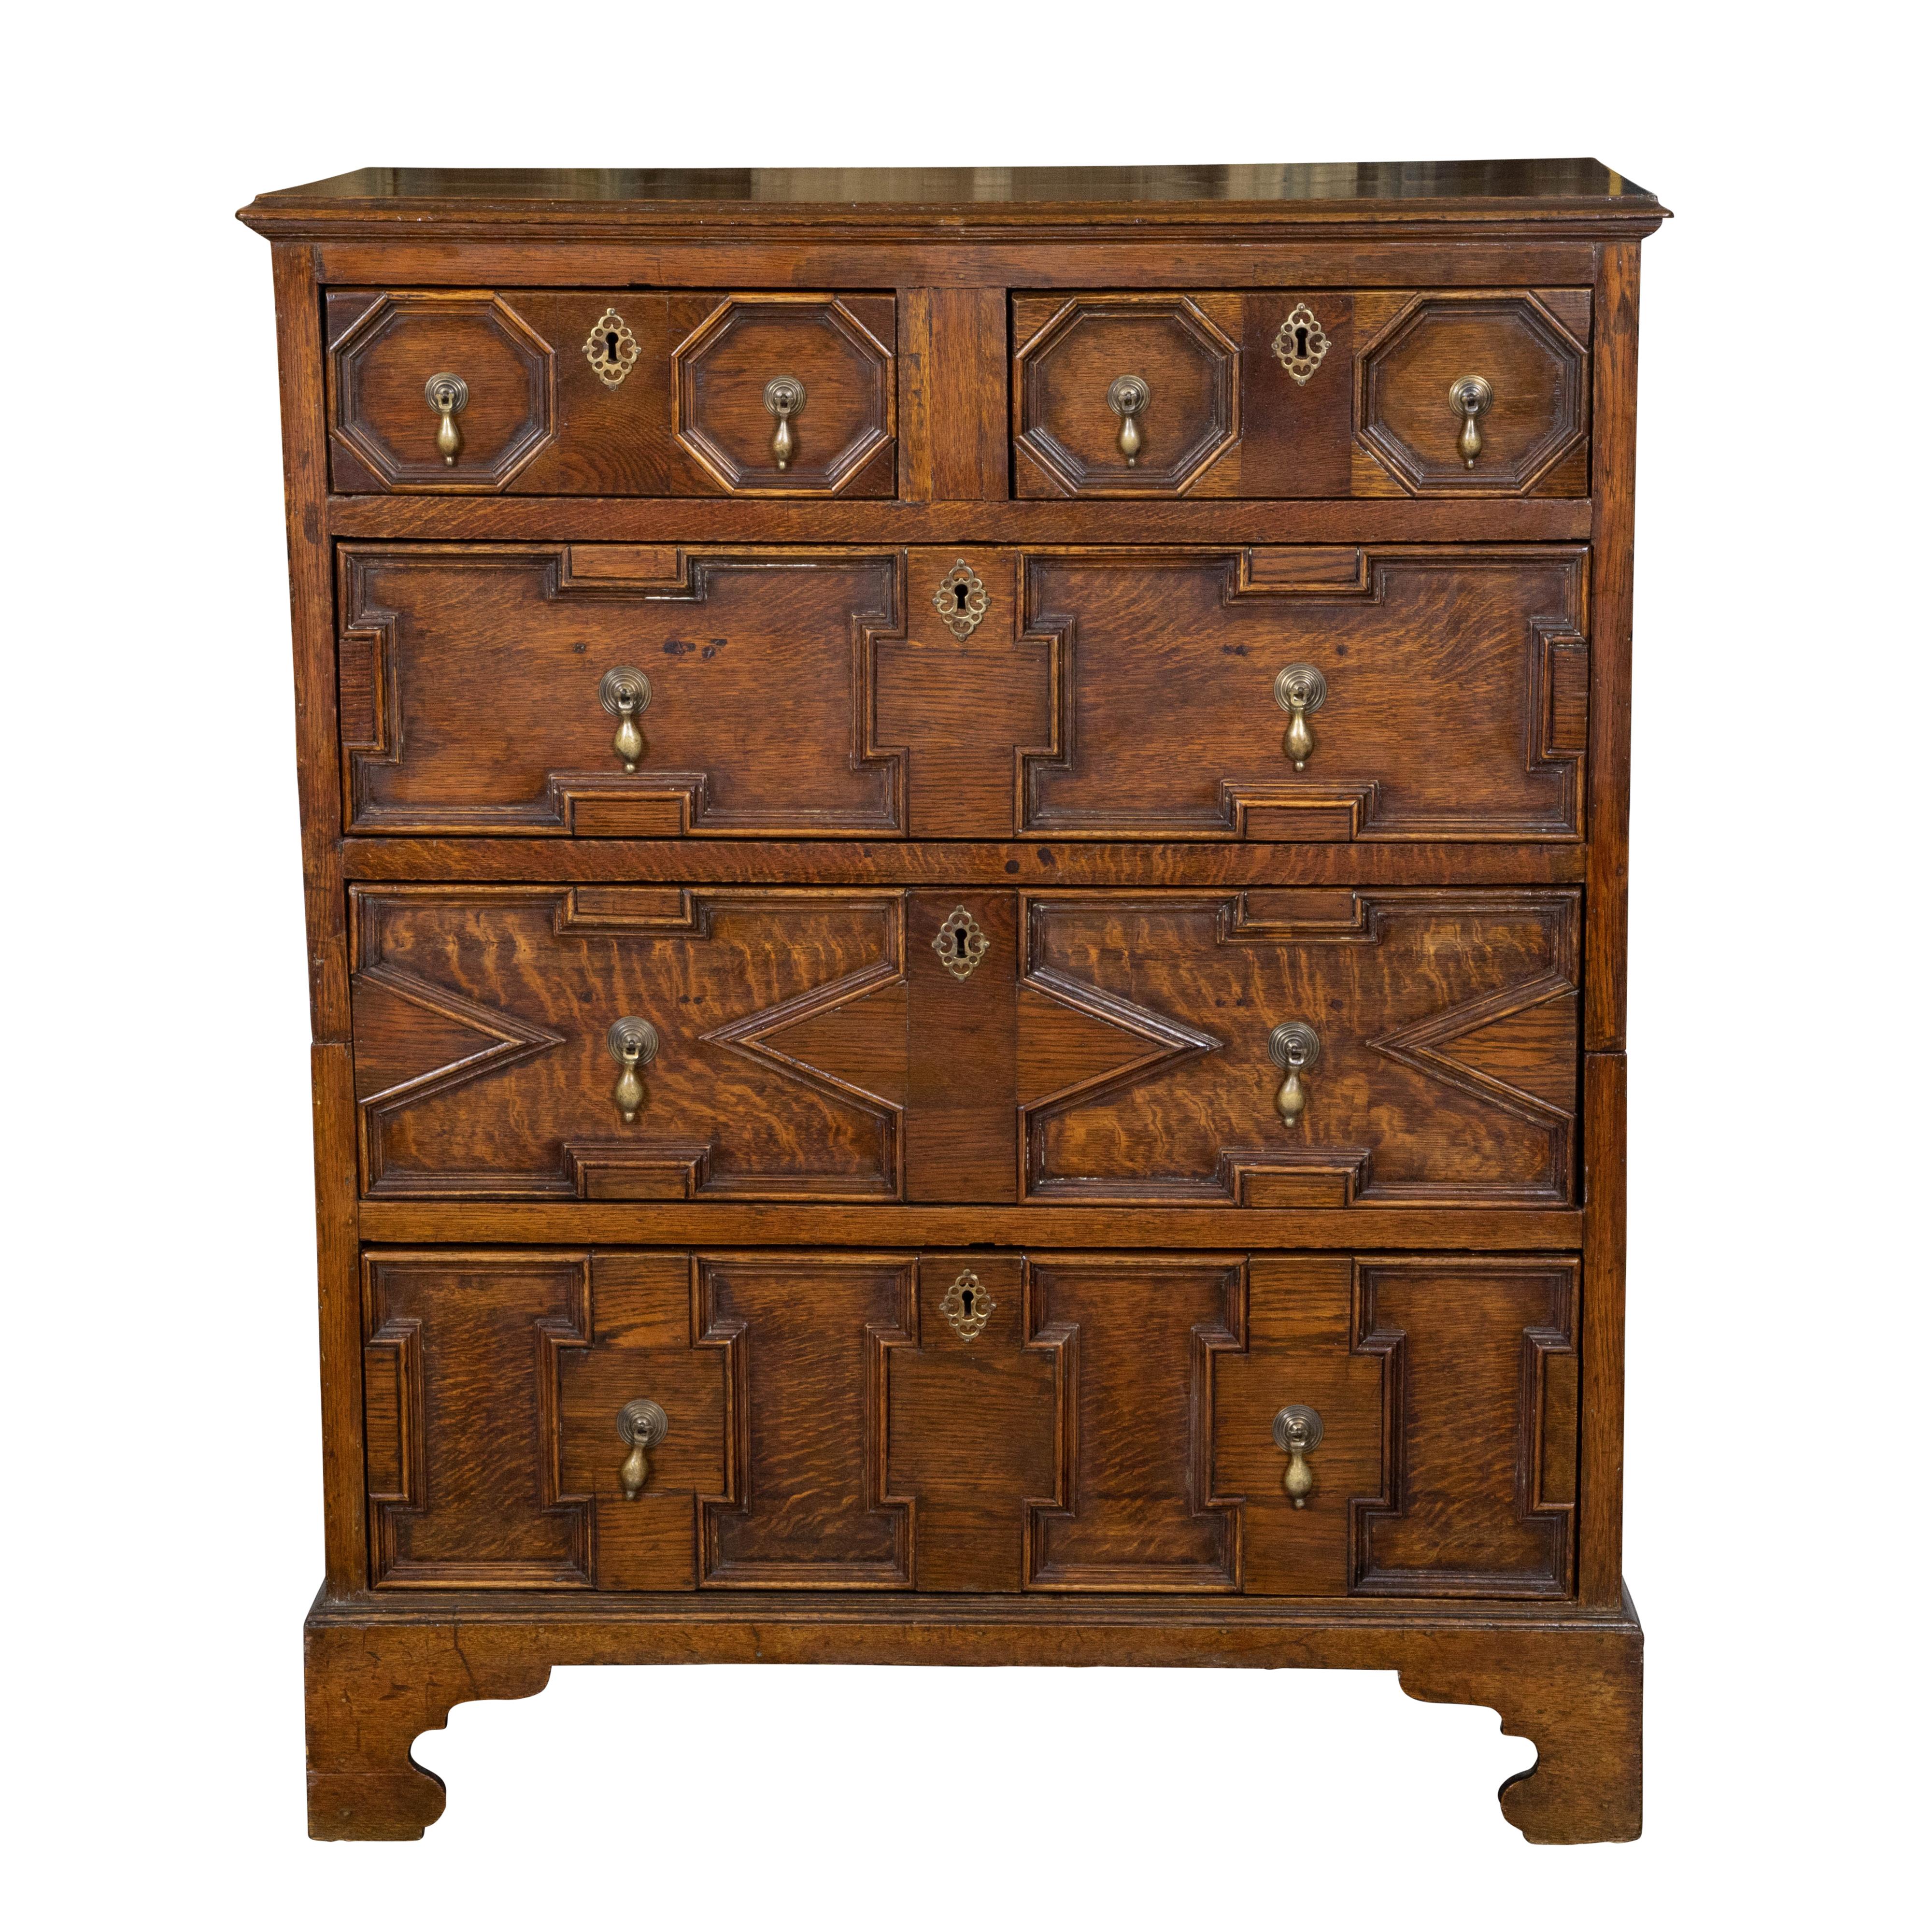 An English George III Period two part oak chest from the early 19th century, with geometric front, five drawers and brass hardware. Created in England during the reign of King George III in the early years of the 19th Century, this oak chest, made